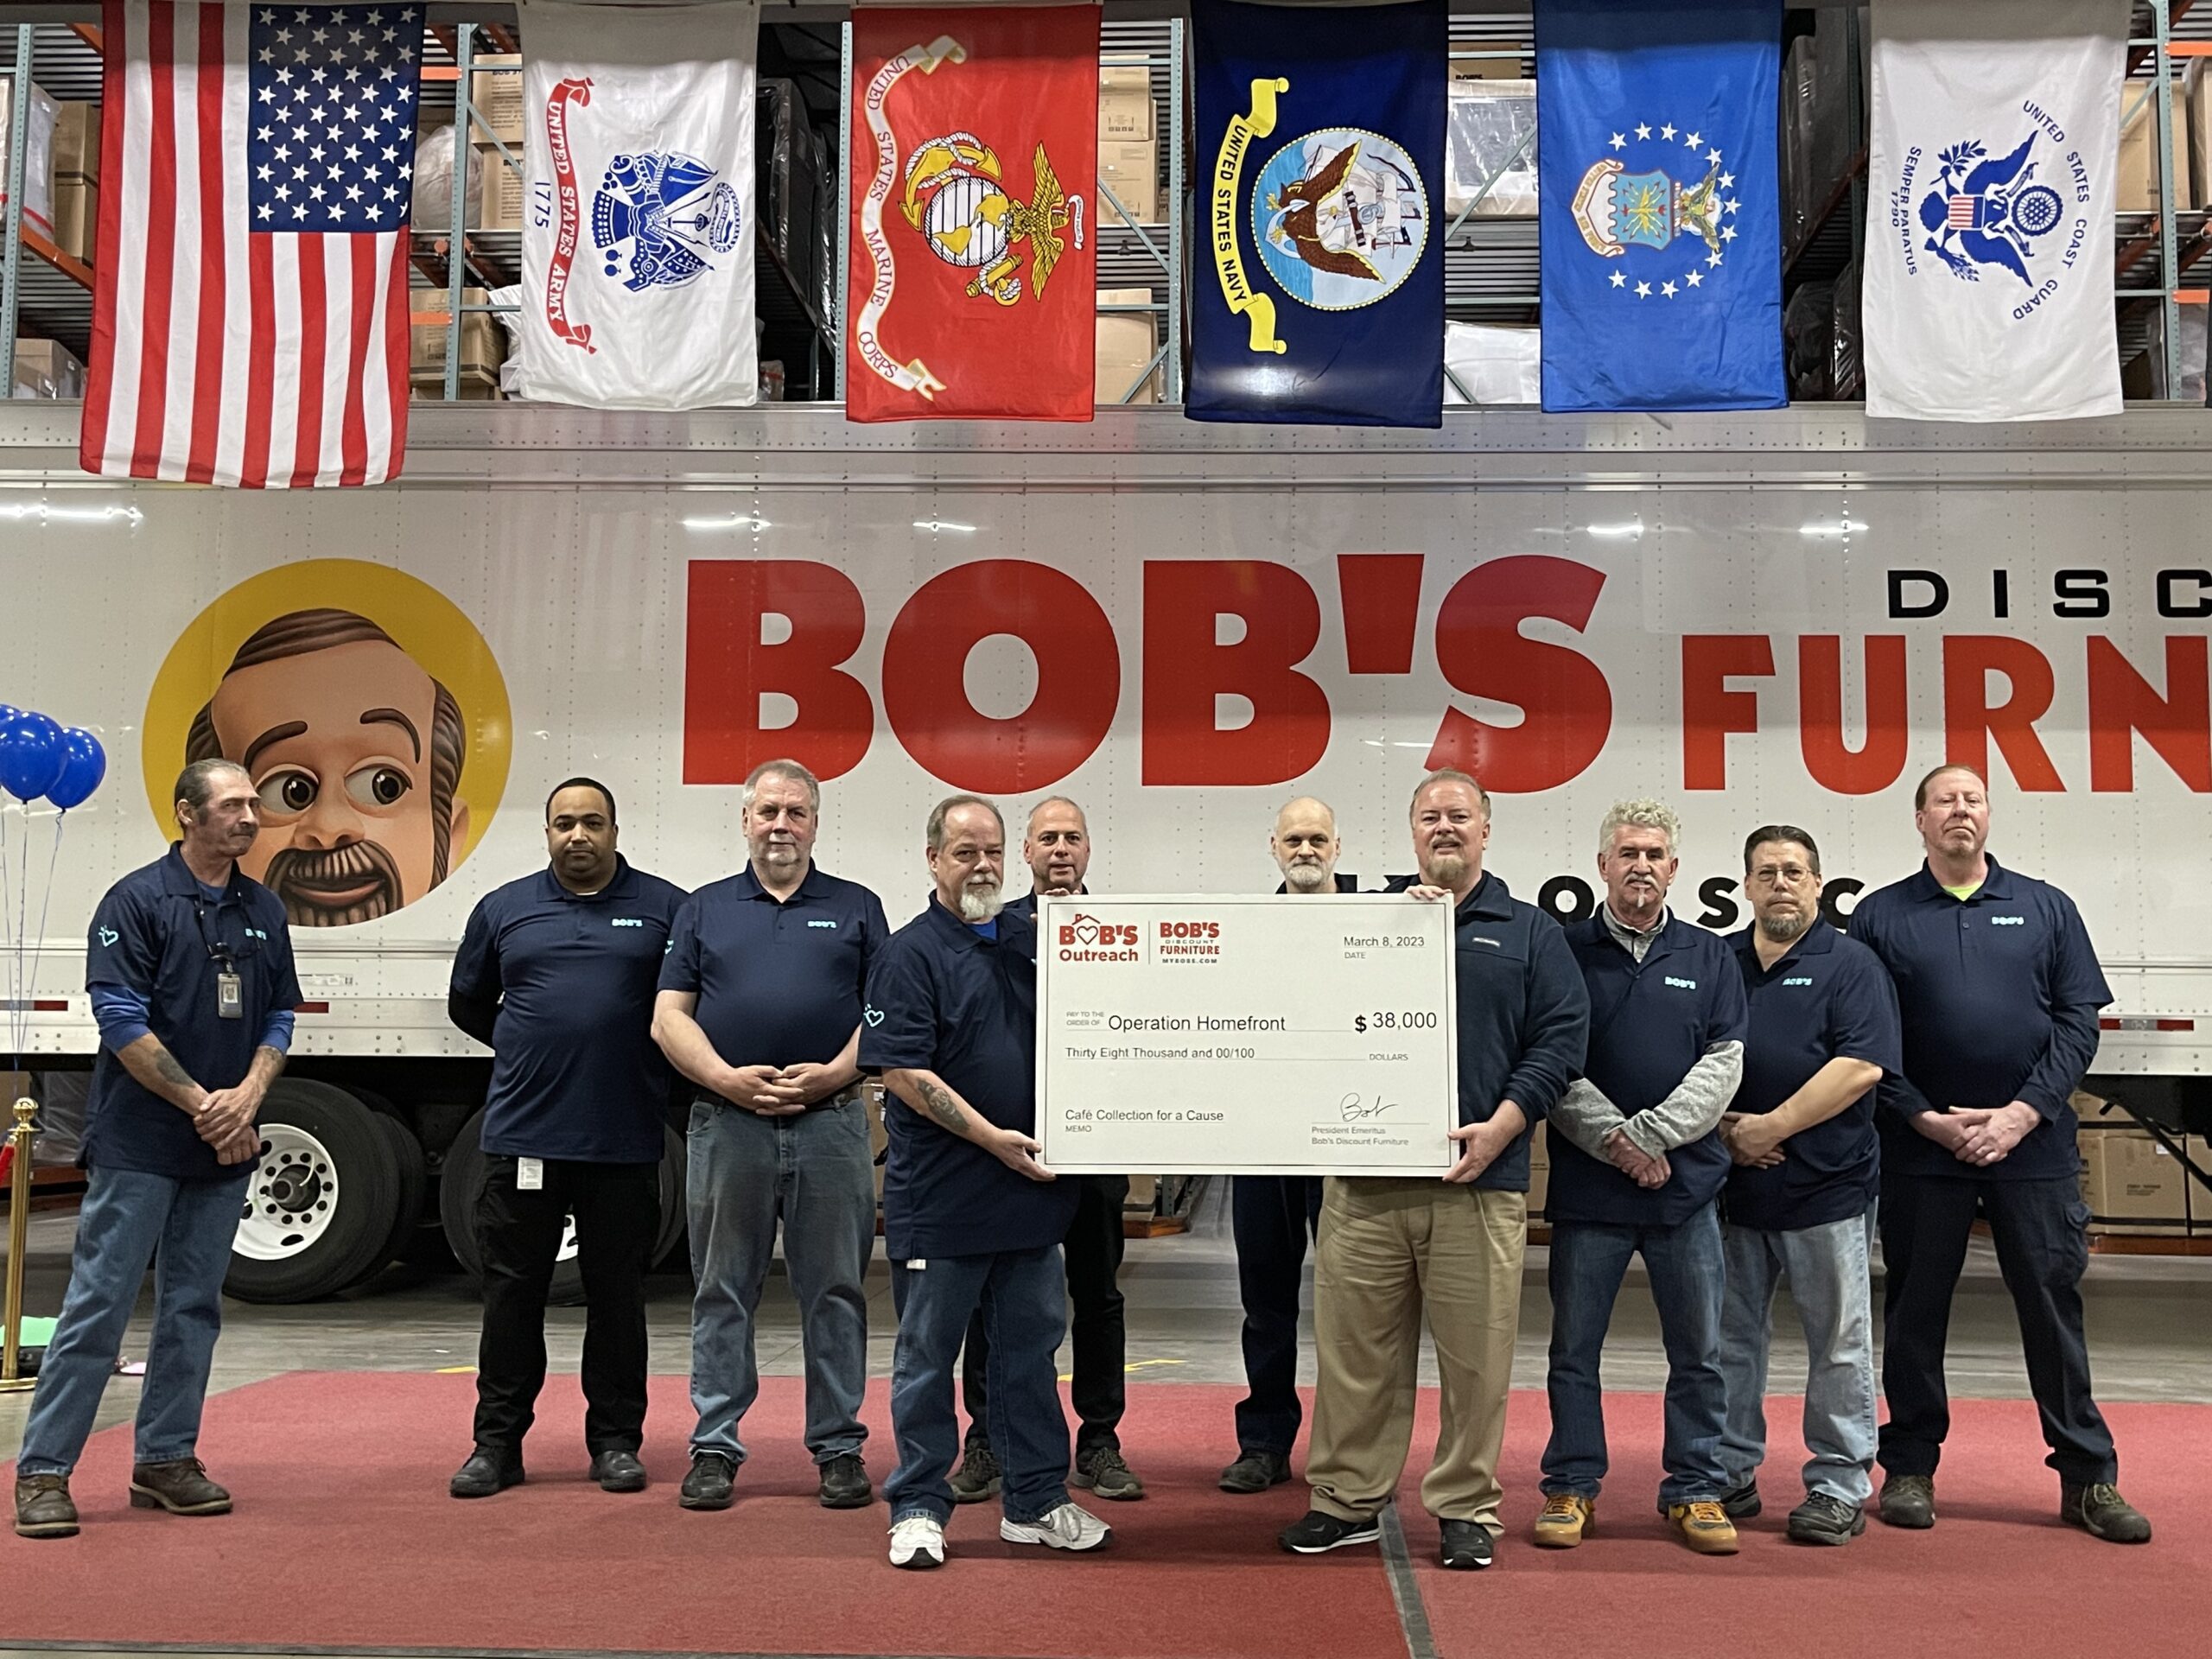 Bob’s Veterans and Active Military Present Donation to Operation Homefront